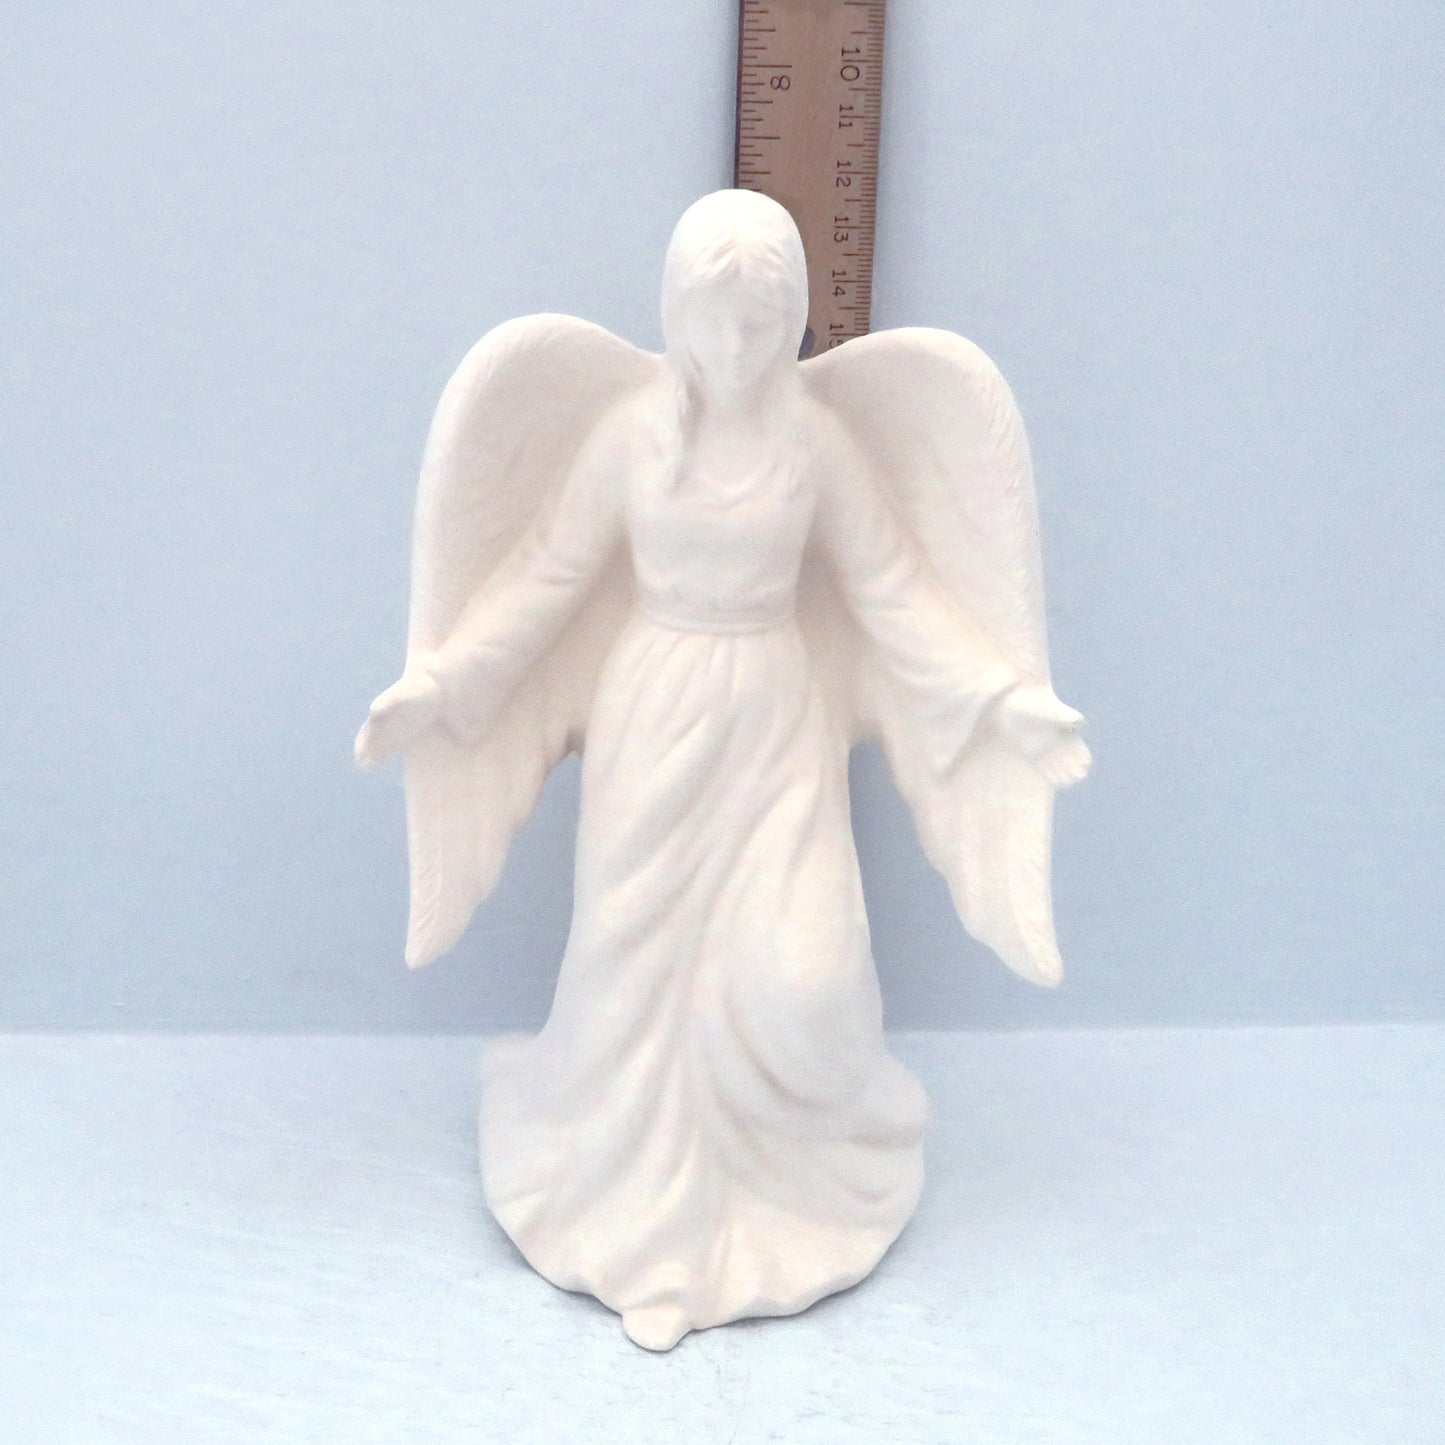 Ready to Paint Standing Ceramic Angel with Arms Outstretched, Angel Gift, Paintable Ceramics,